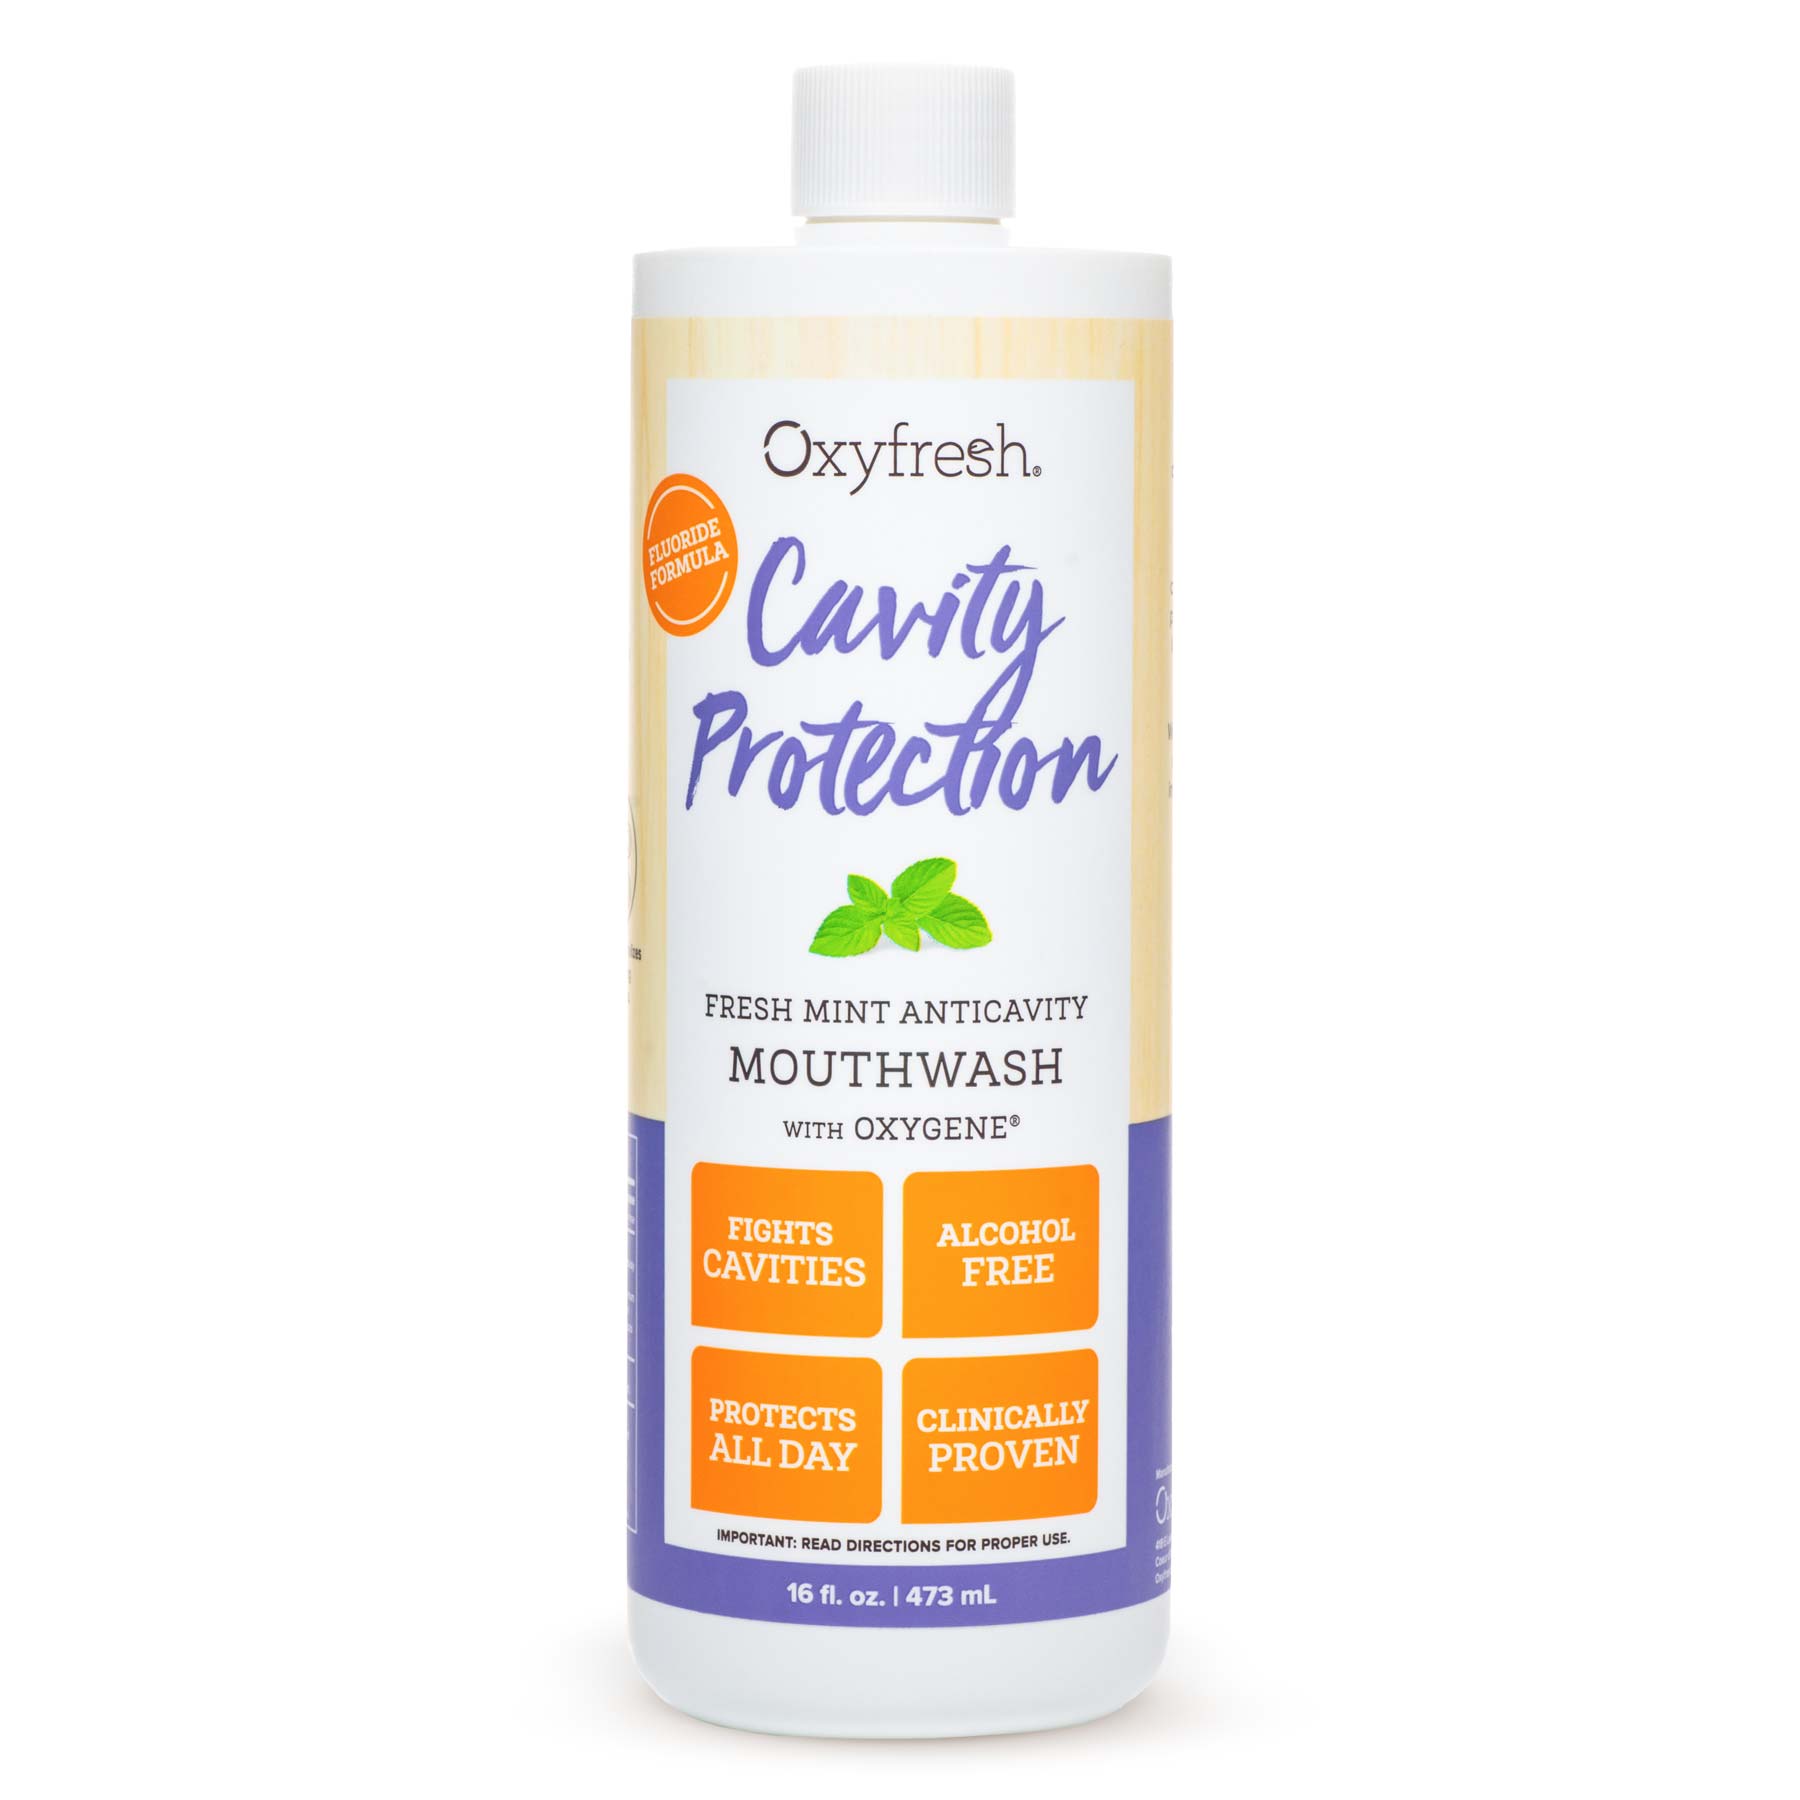 oxyfresh-cavity-protection-fluoride-mouthwash-for-sensitive-teeth